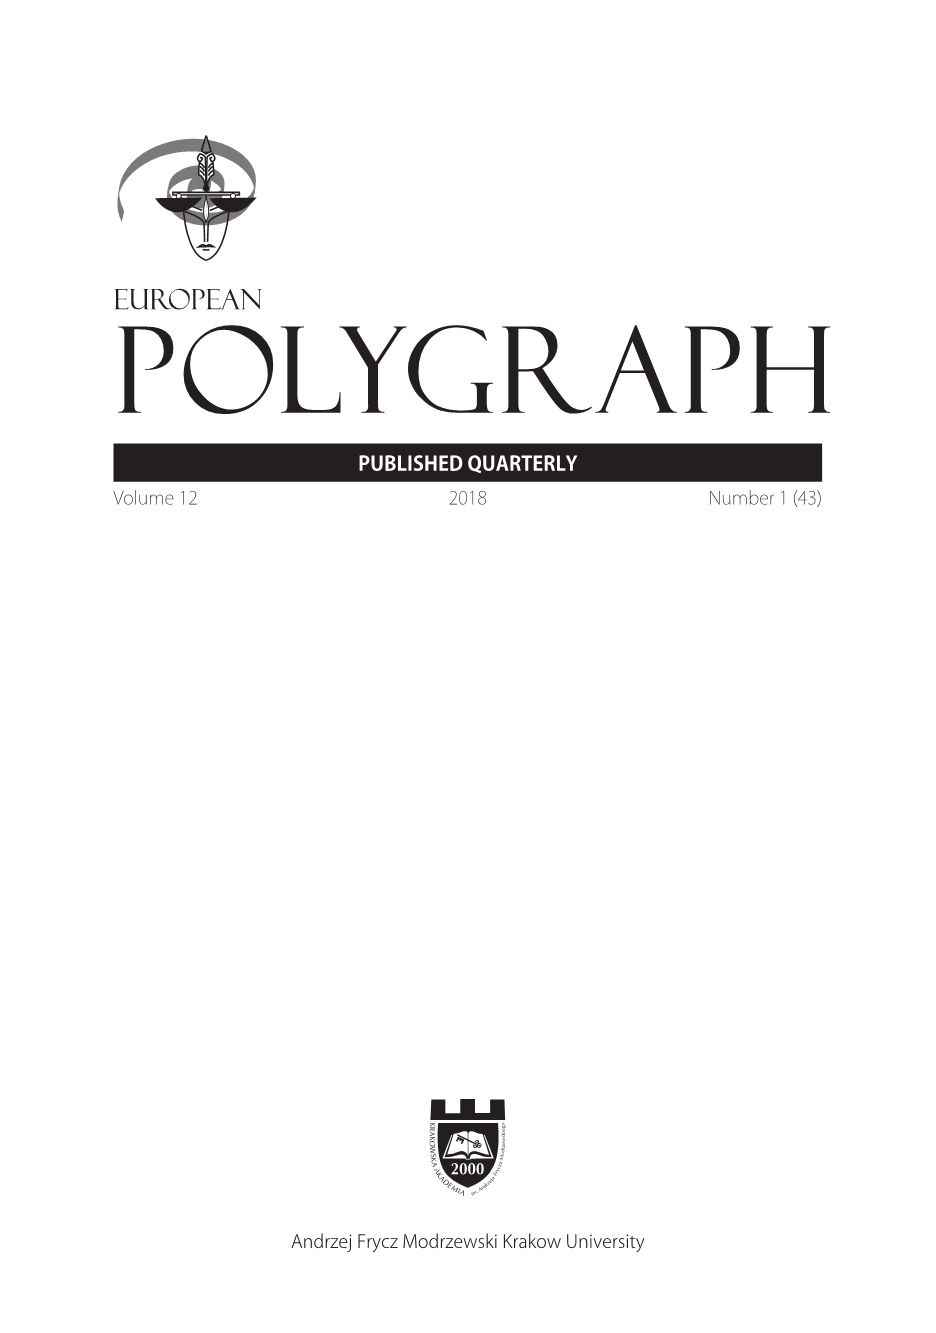 Tuvia Shurany, Nathan J. Gordon: The Foundation of Polygraph. The Pre-Test Interview, Columbia SC 2018, 78 pp. Cover Image